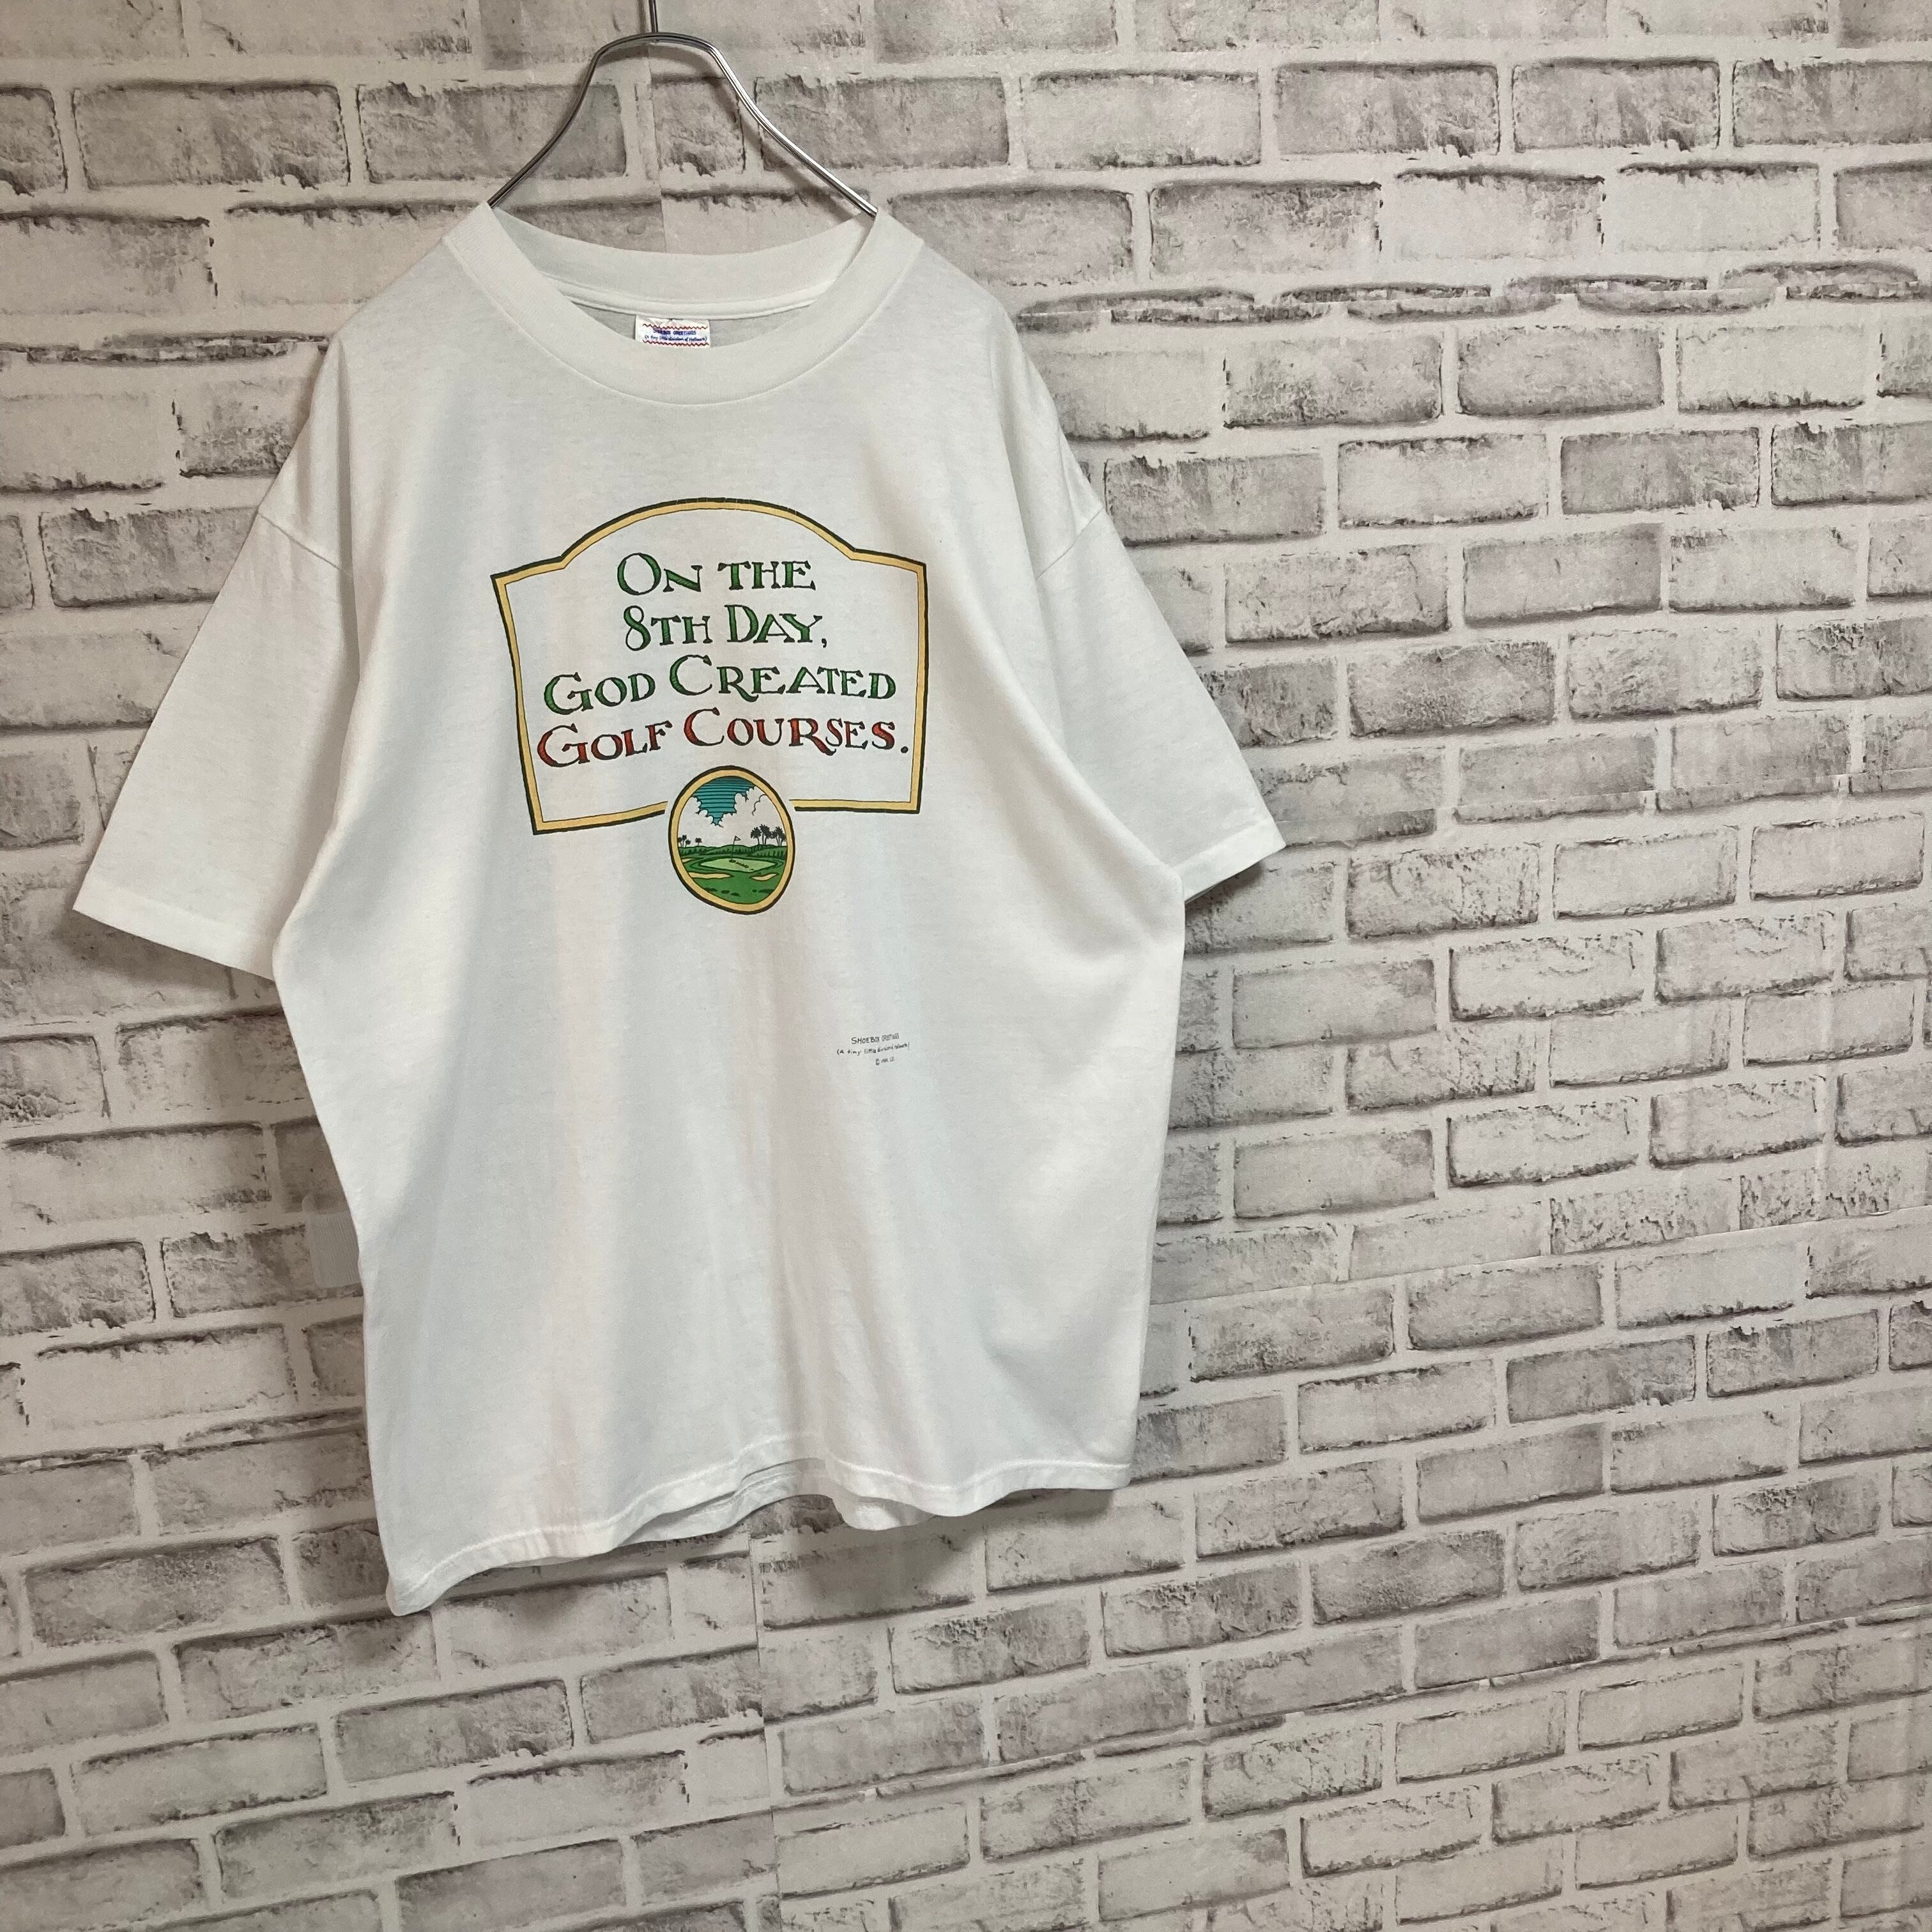 【SHOEBOX GREETING】S/S Tee XL 90s Made in USA vintage 企業モノ Tシャツ アメリカ製 アートT  ゴルフ シングルステッチ アメリカ USA 古着